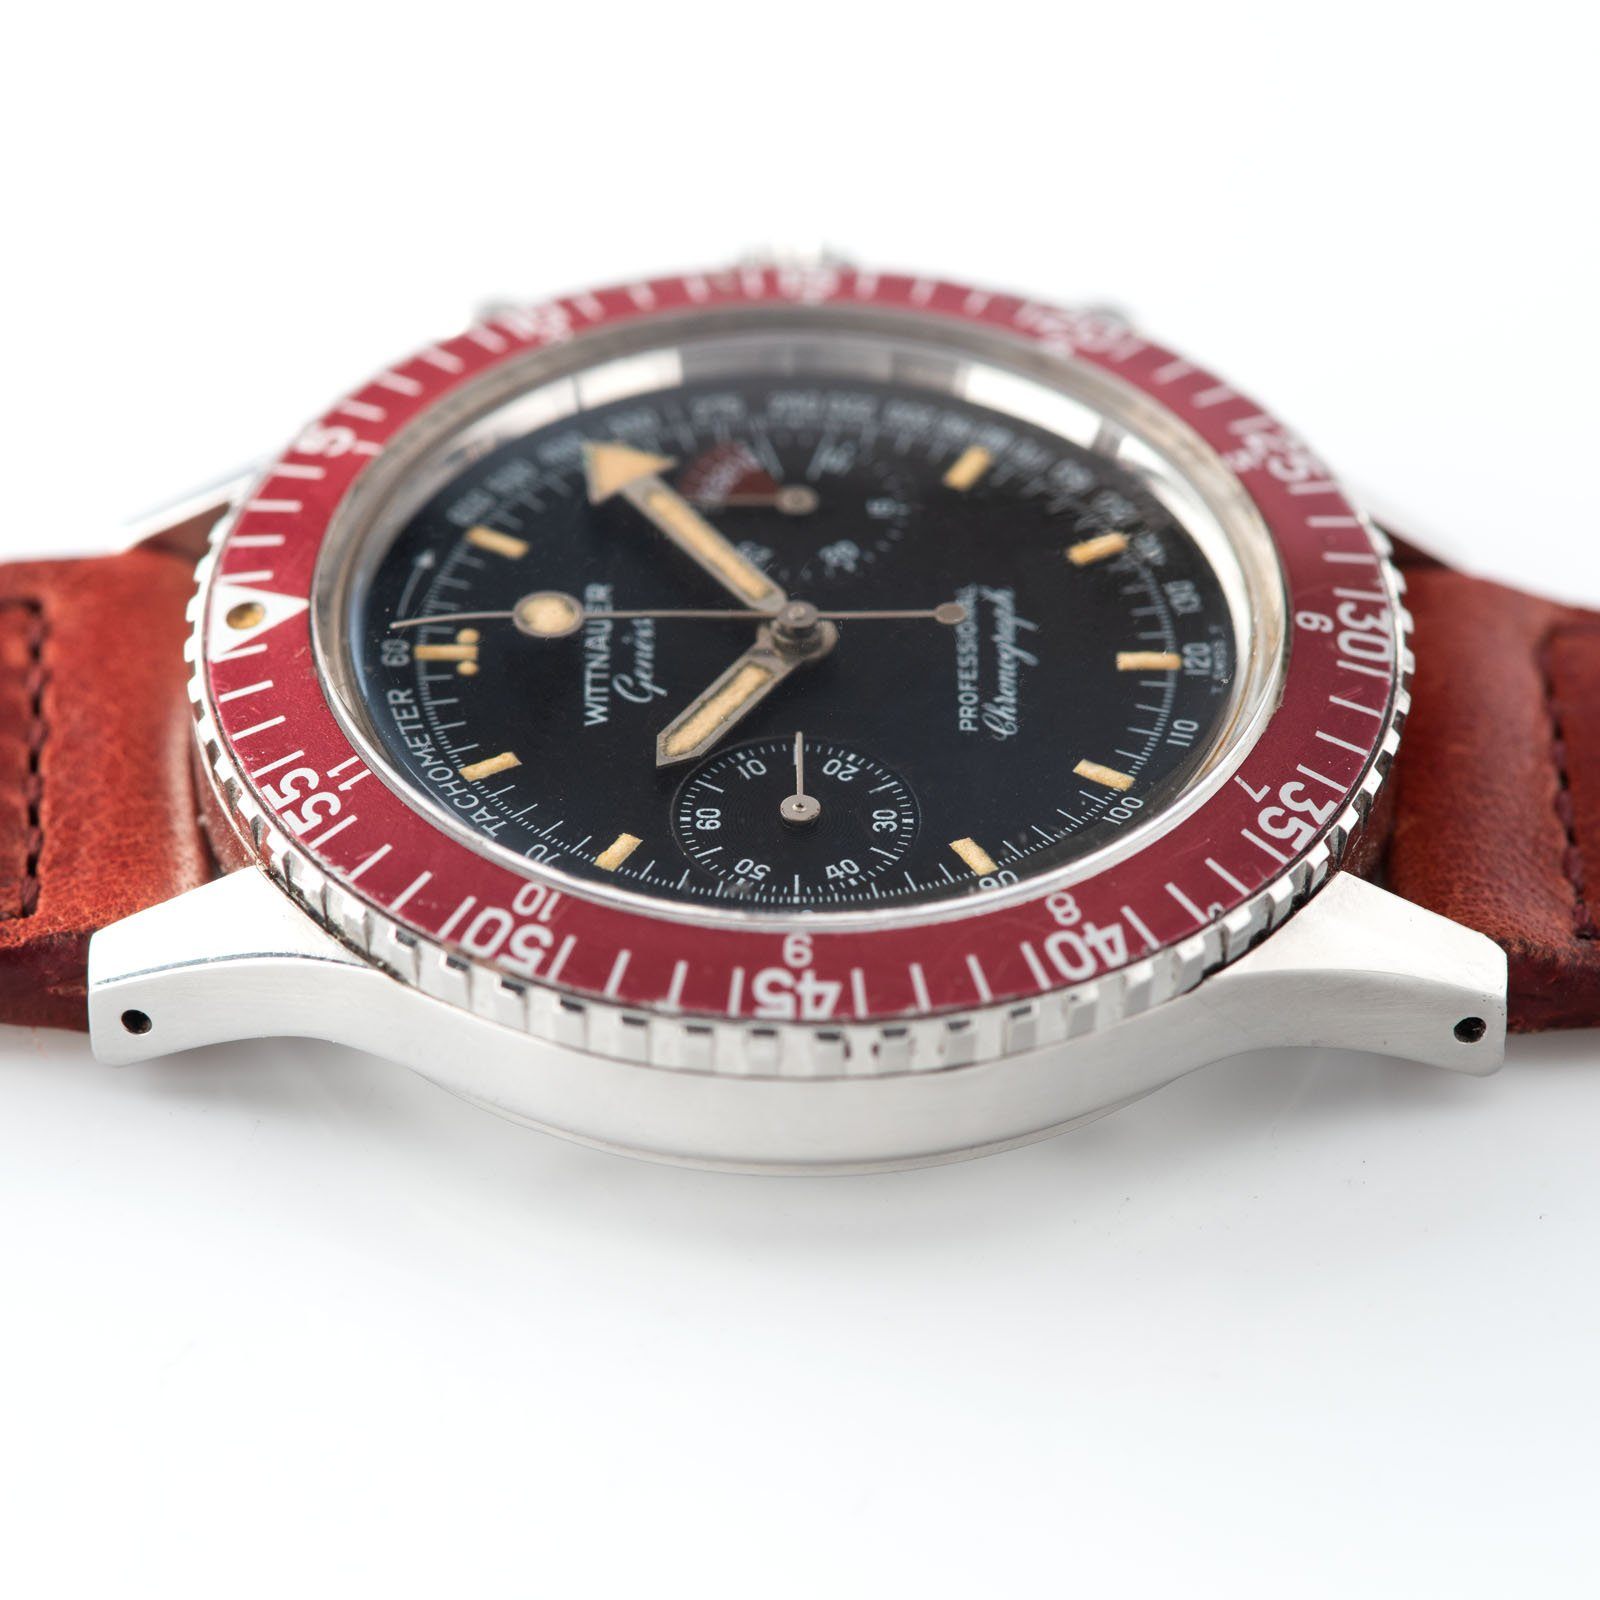 Wittnauer 239T Reference 7004A Steel Chronograph